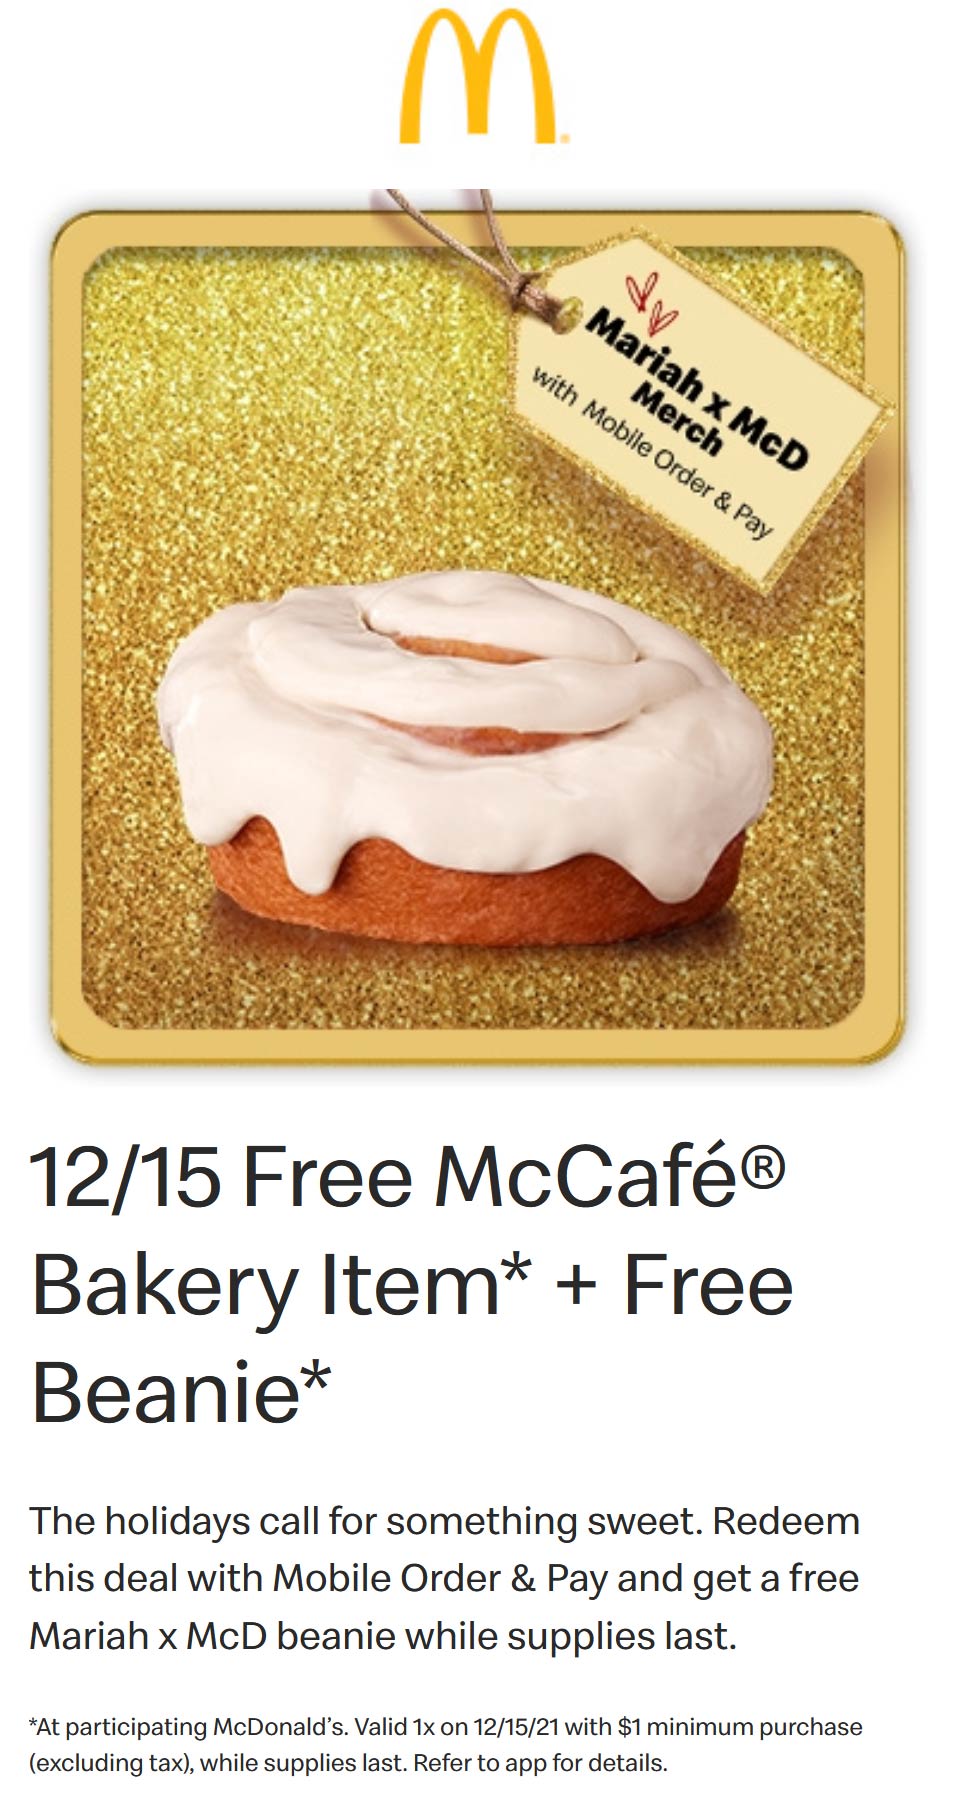 McDonalds restaurants Coupon  Free bakery item & beanie with mobile orders today at McDonalds restaurants #mcdonalds 